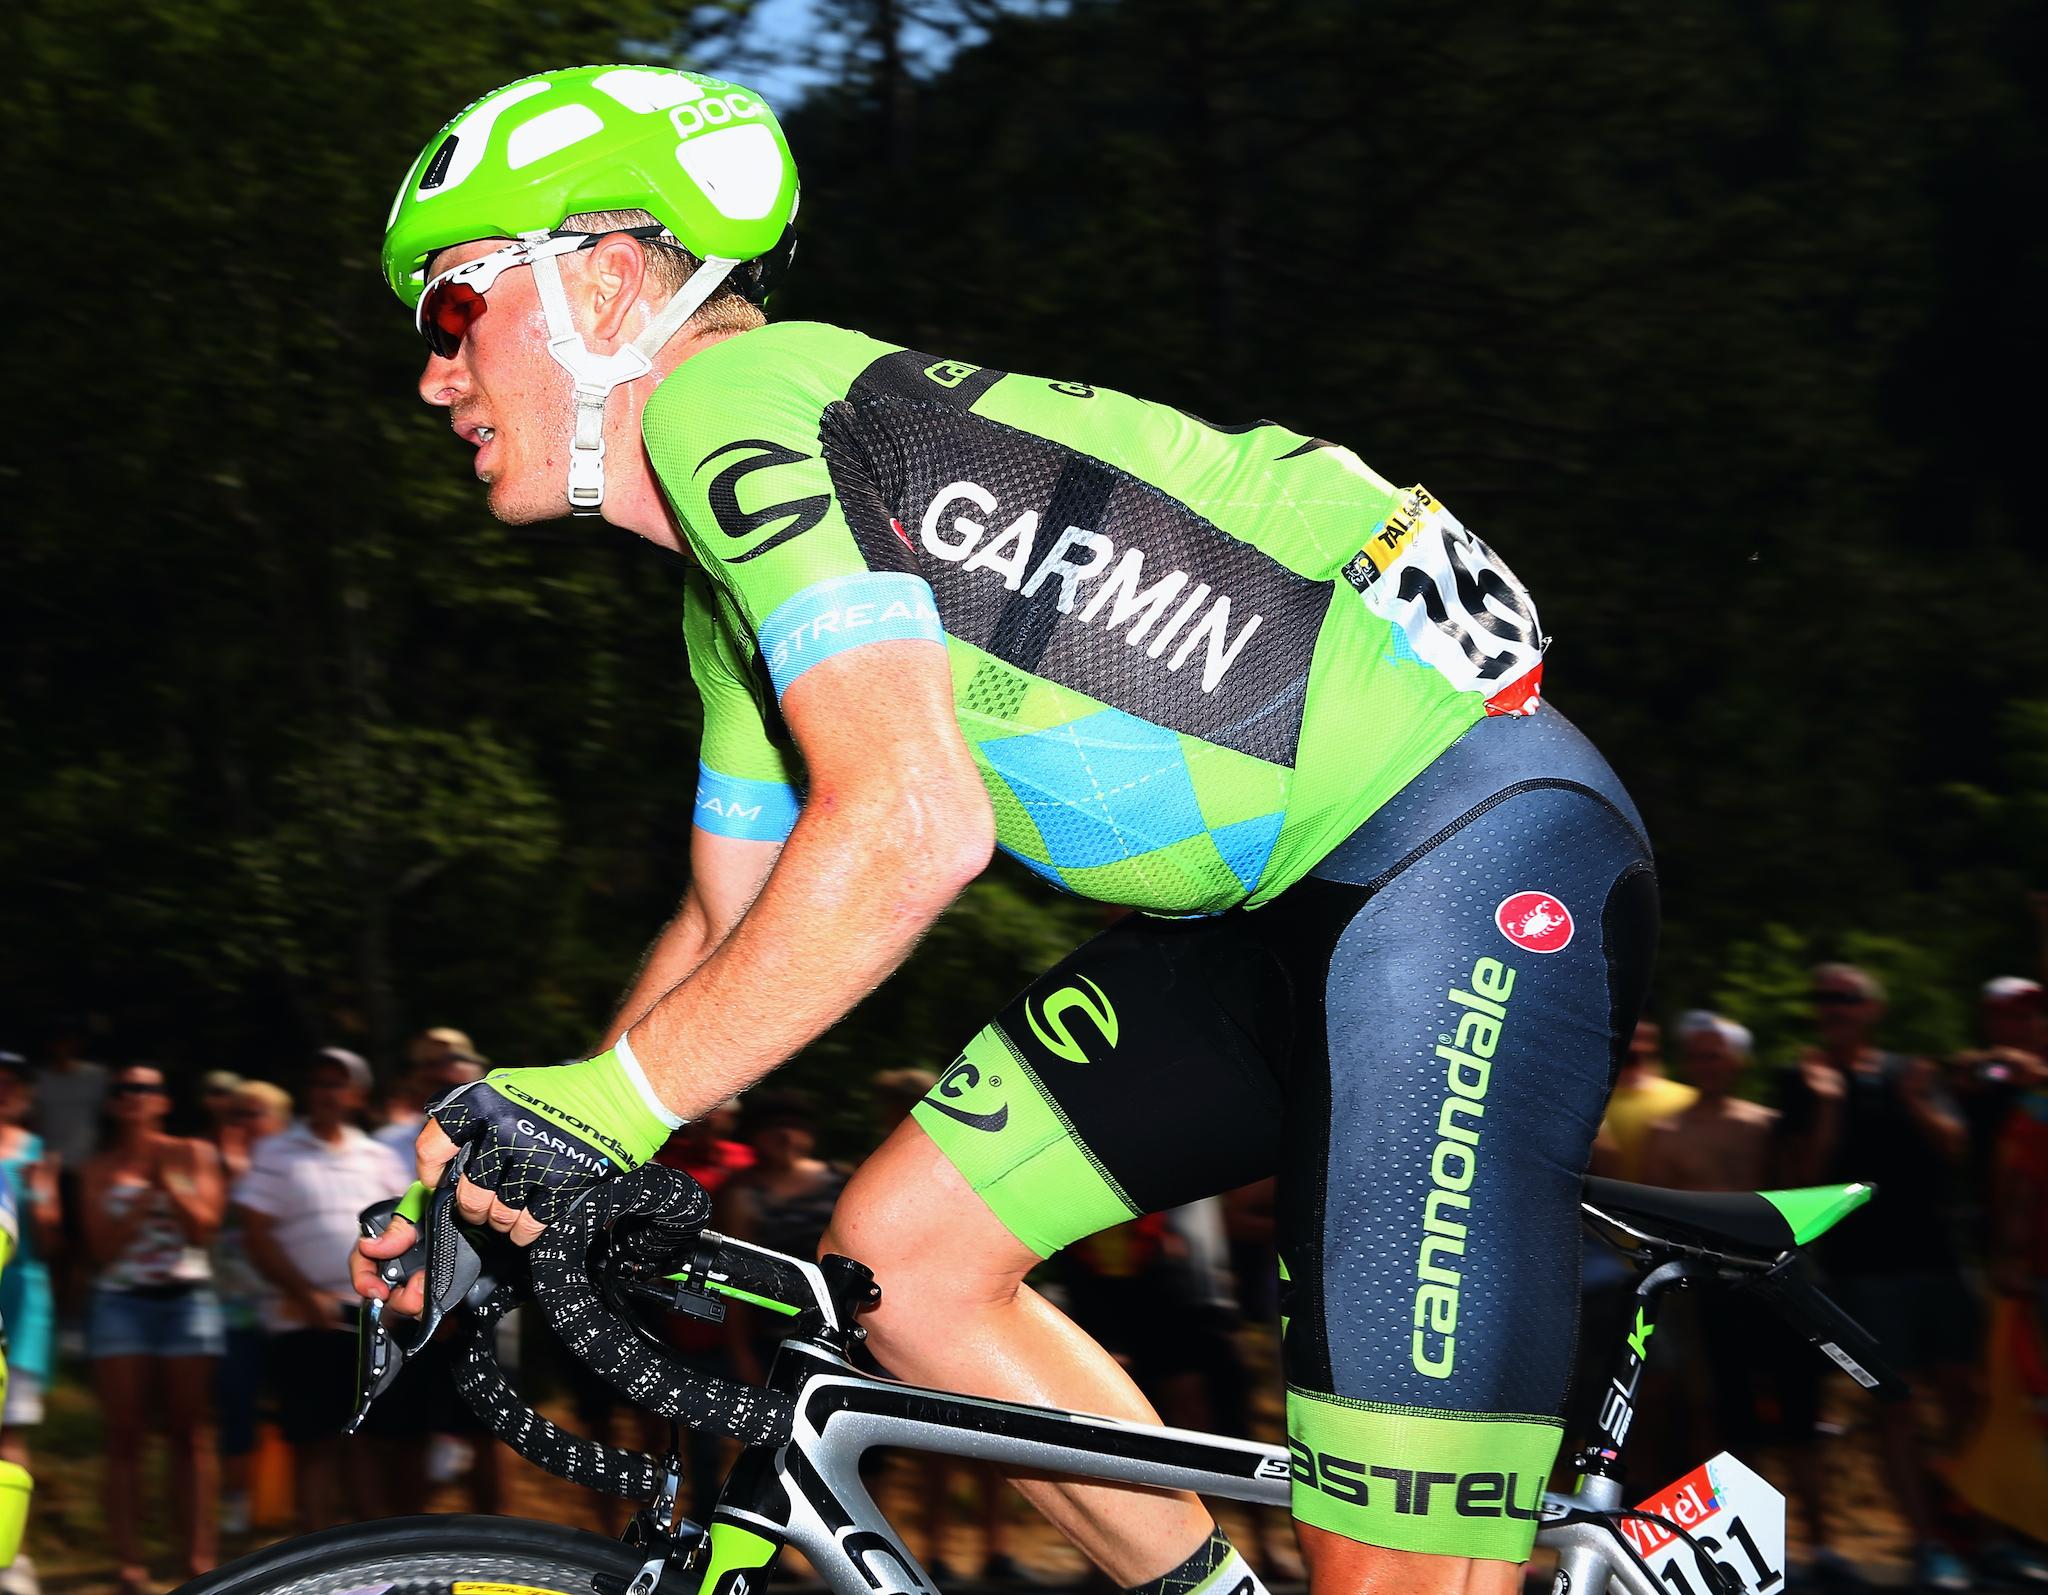 Andrew Talansky of the USA and Team Cannondale-Garmin in action on stage 14 of the 2015 Tour de France, a 178km stage from Rodez to Mende, on July 18, 2015 in Mende, France